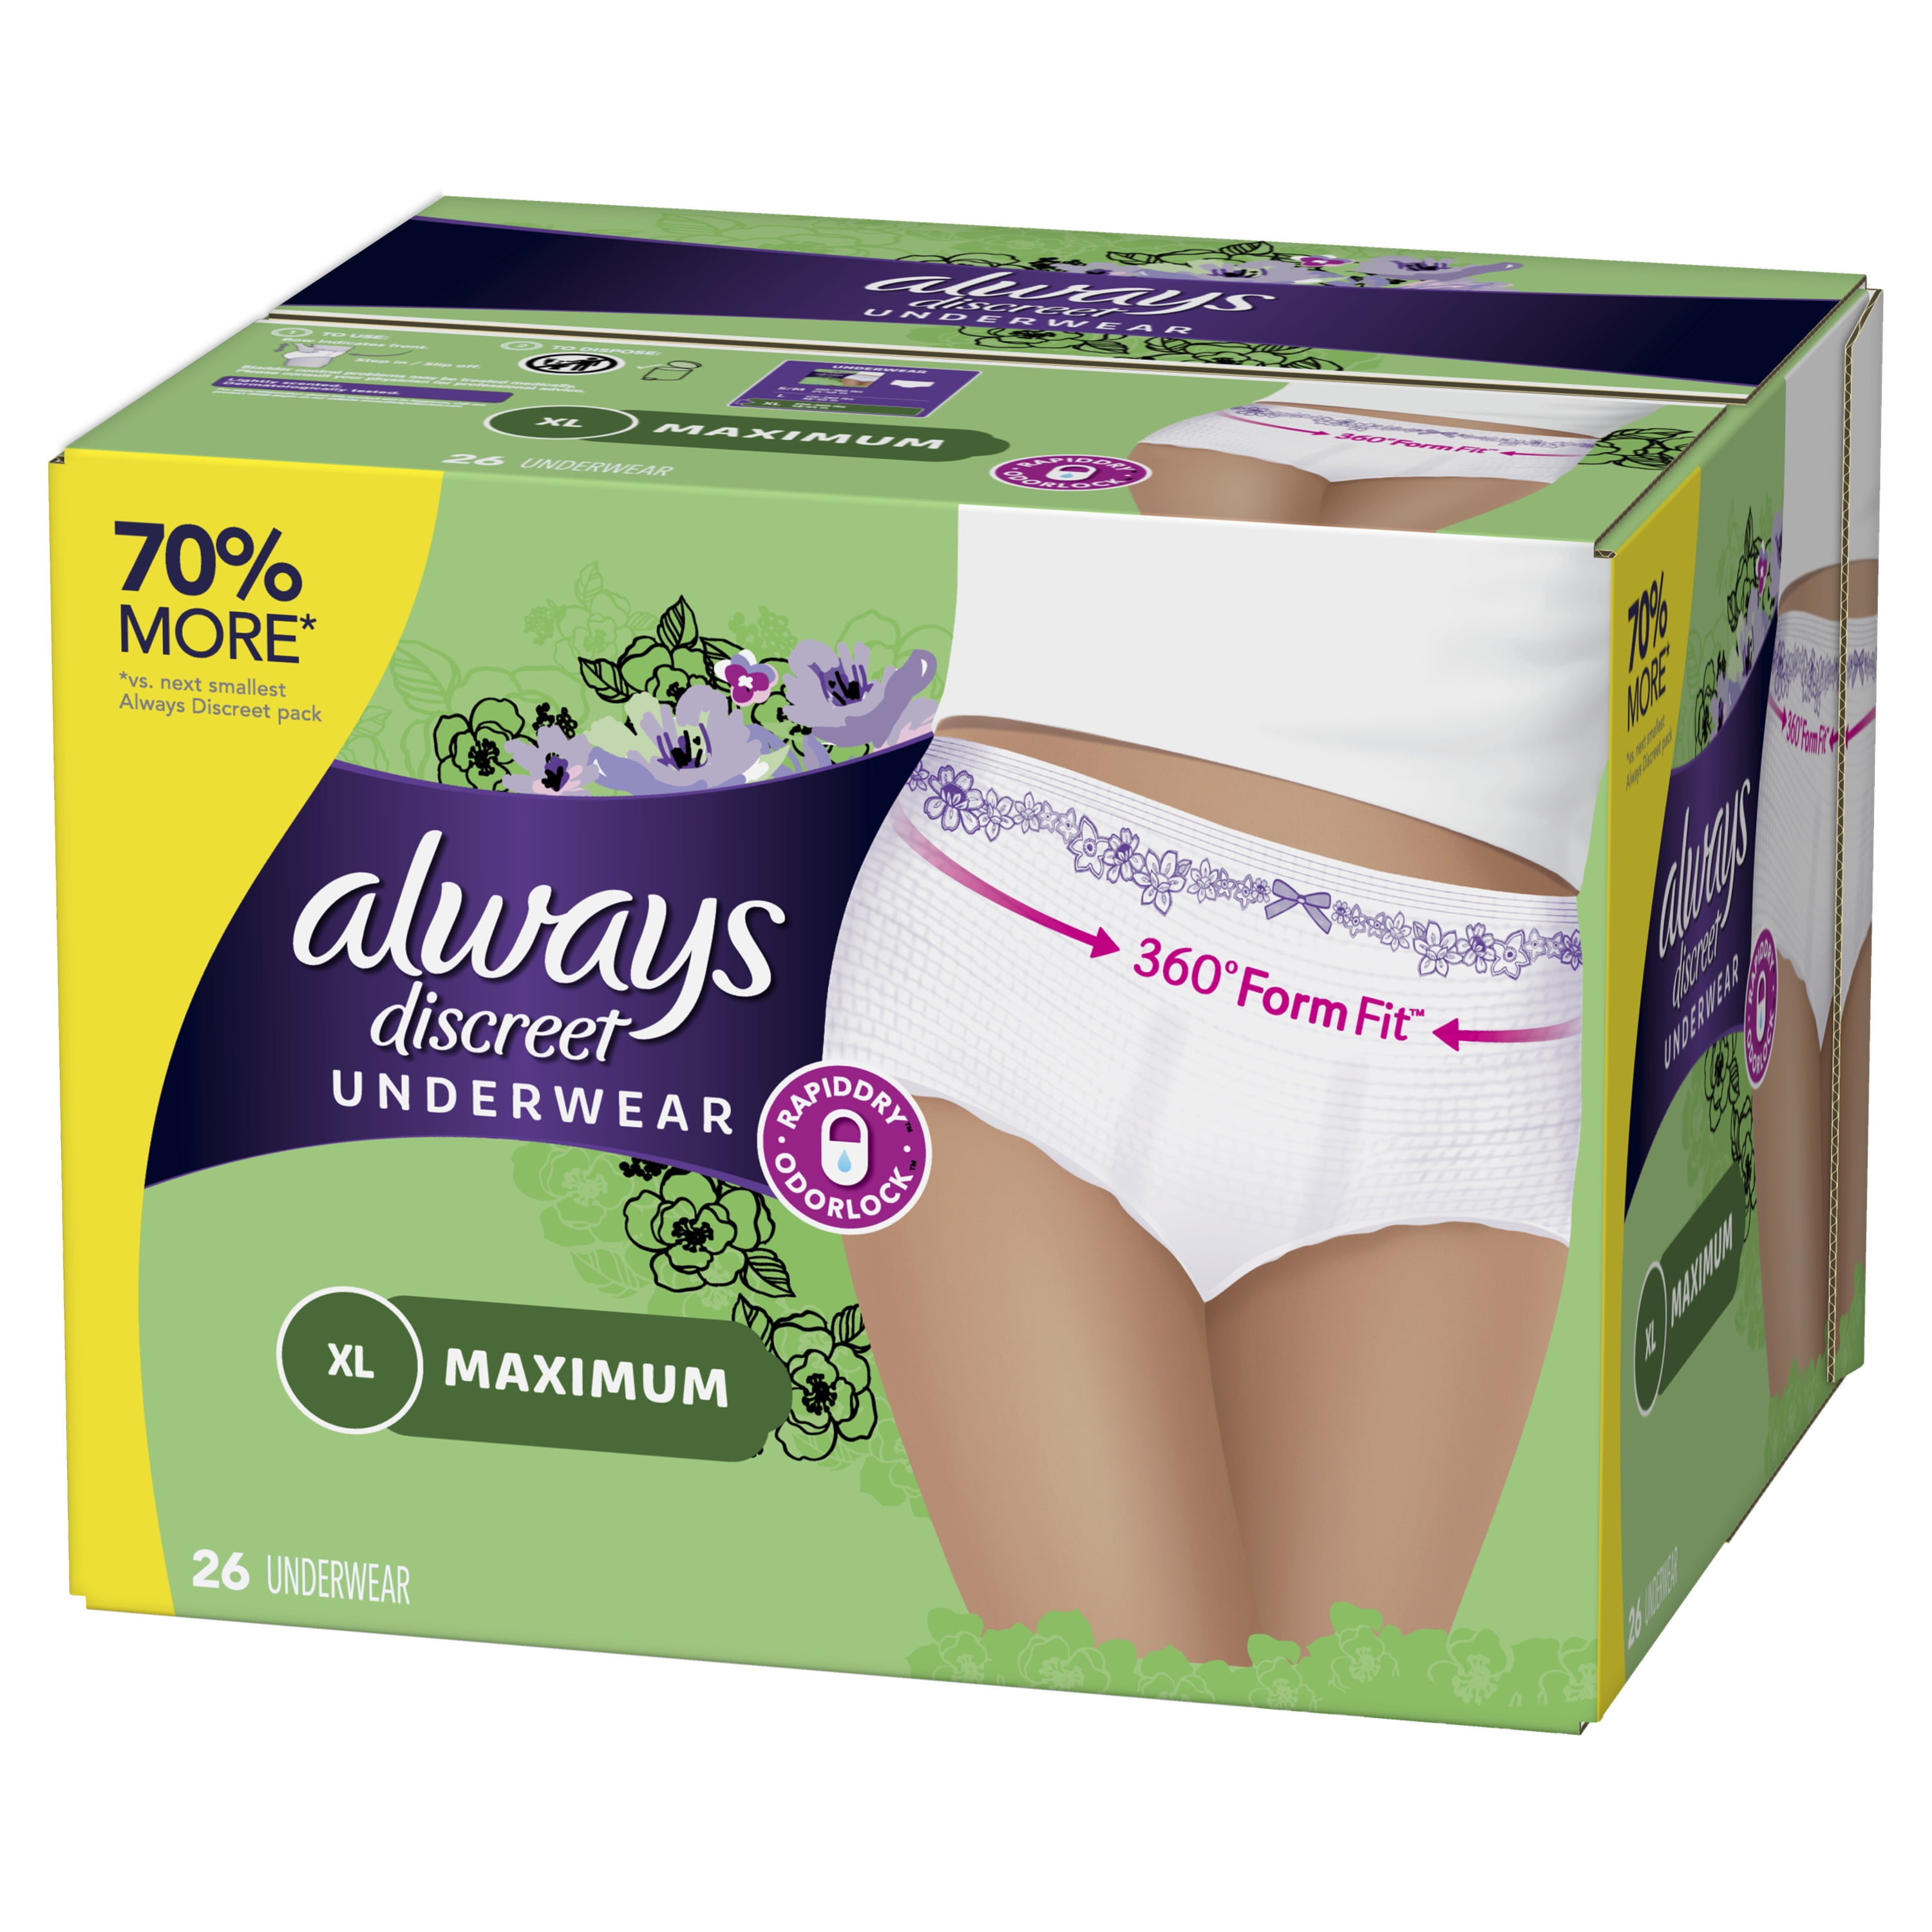 Always Discreet Underwear 22 ct Pull Up Panty XXL 360 Form Fit